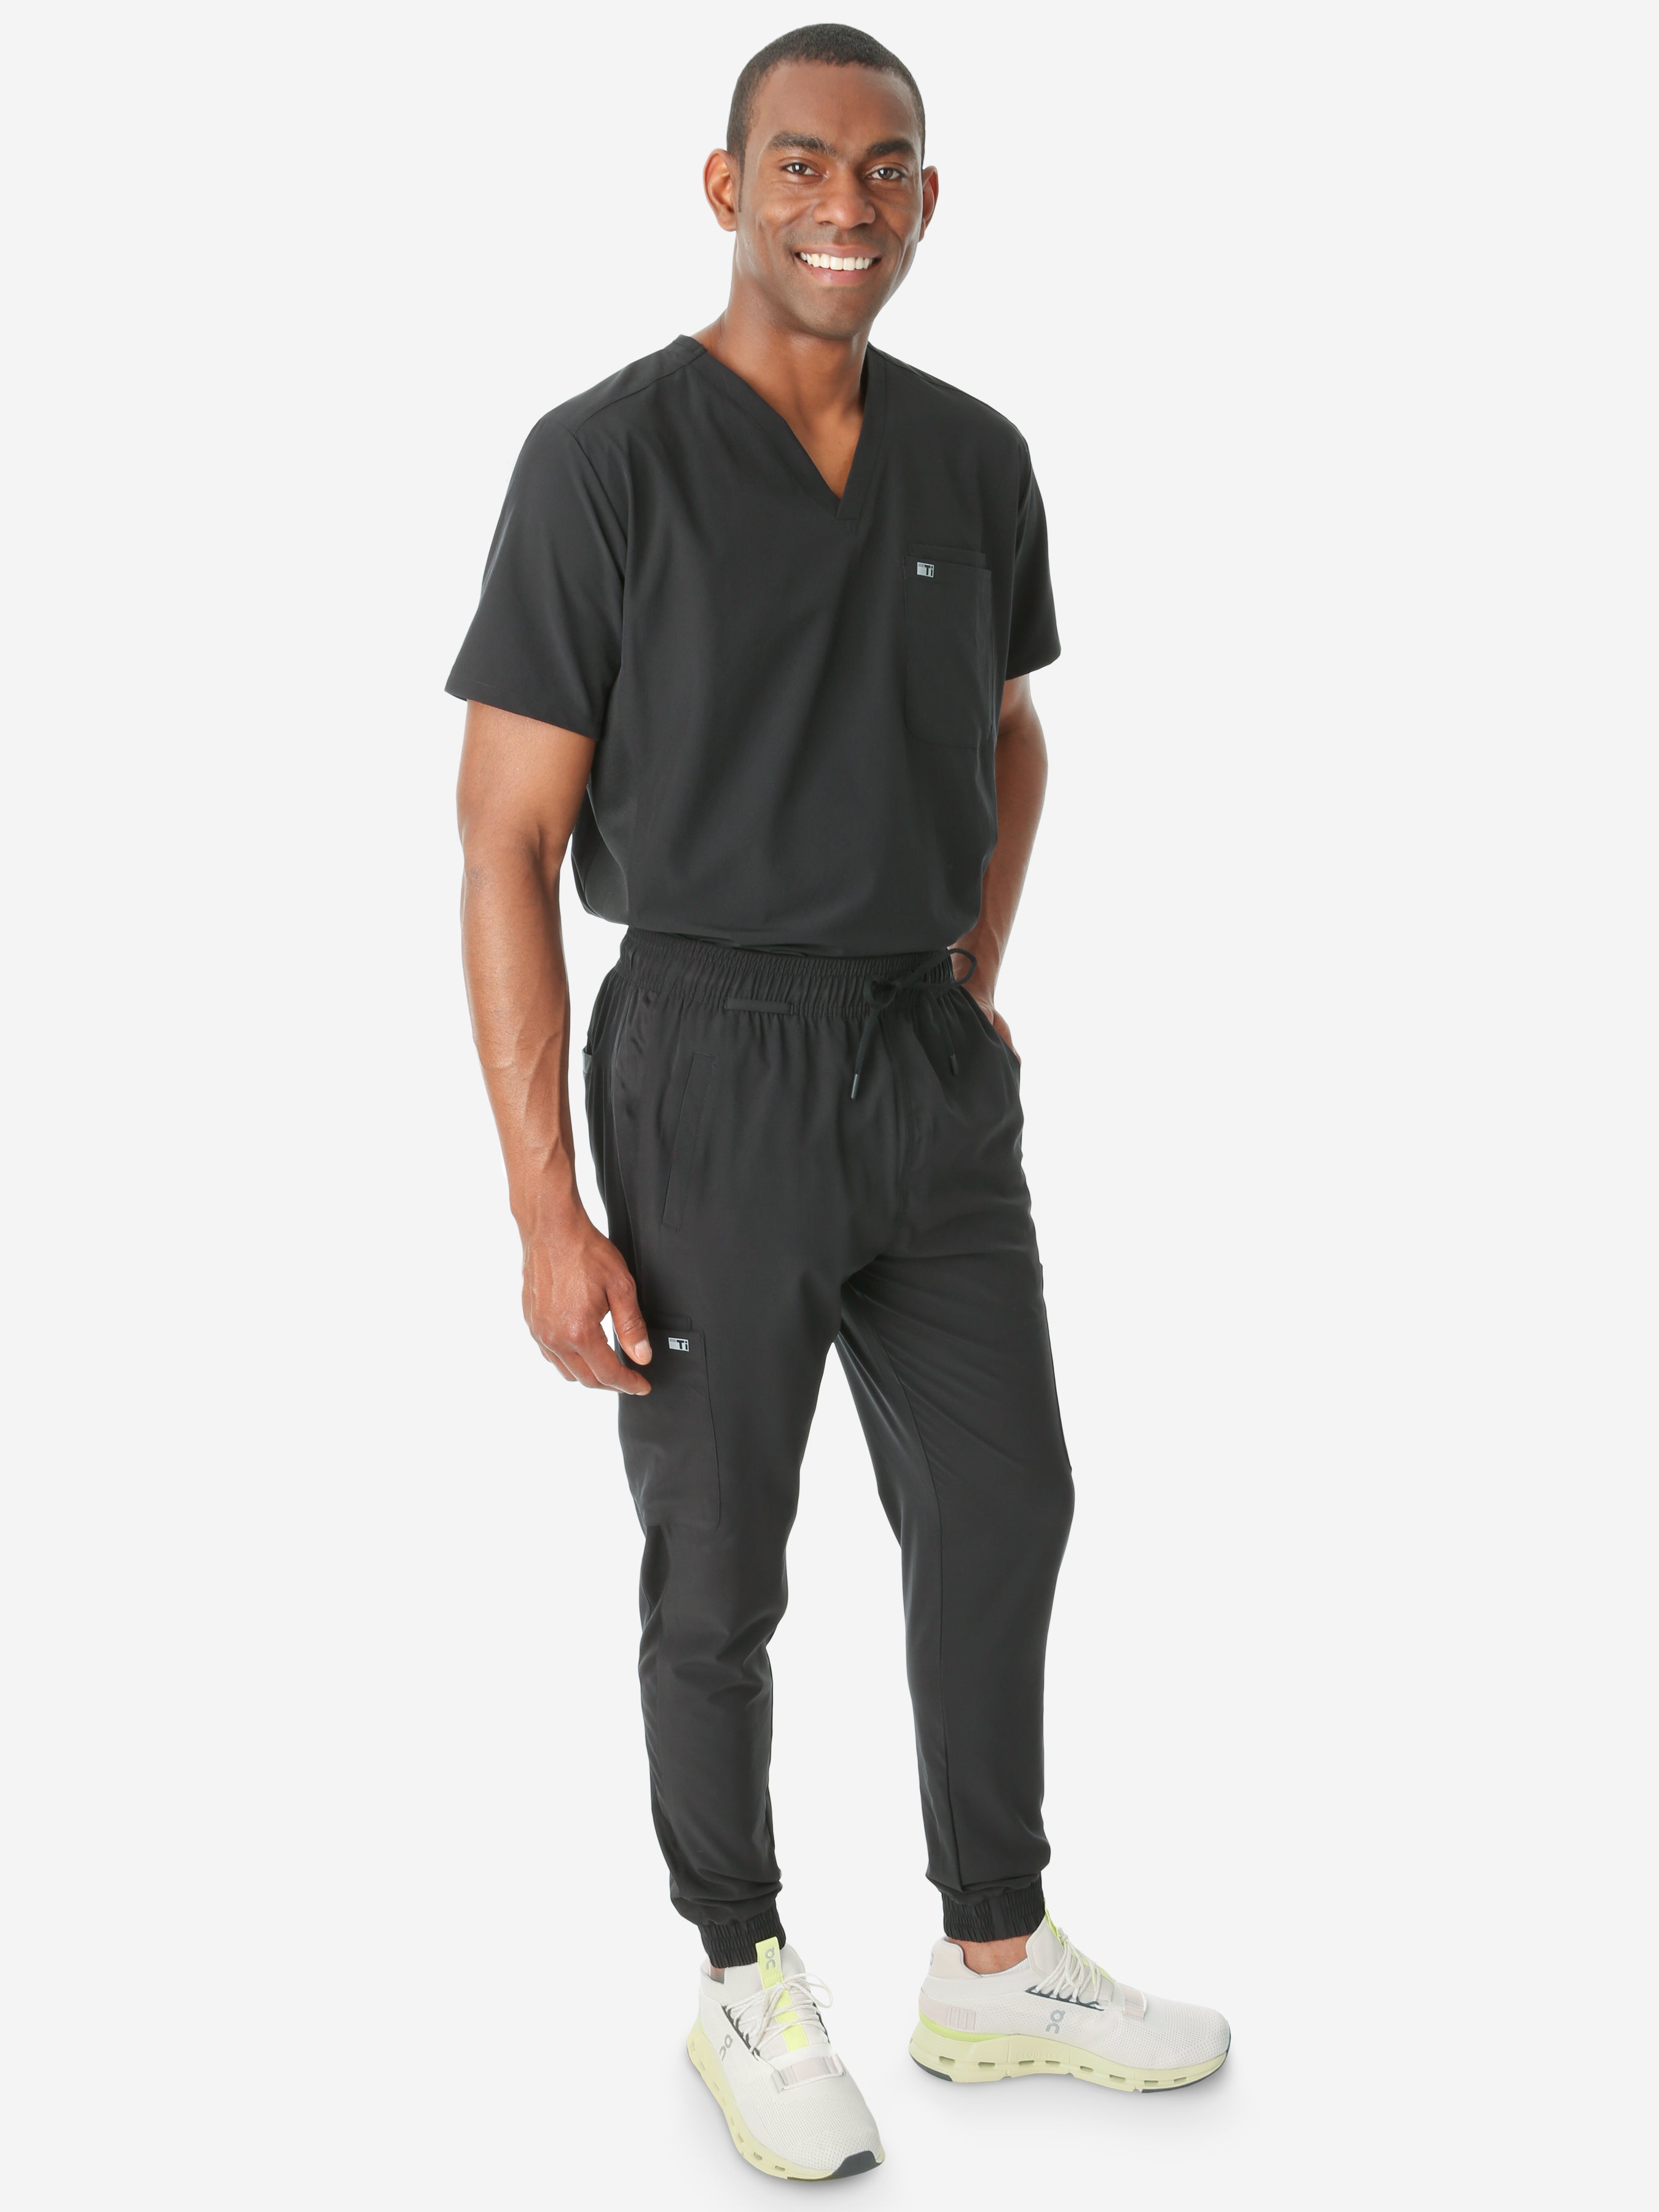 TiScrubs Stretch Real Black Jogger Scrub Pants and Double Pocket Top Tucked Full Body Front